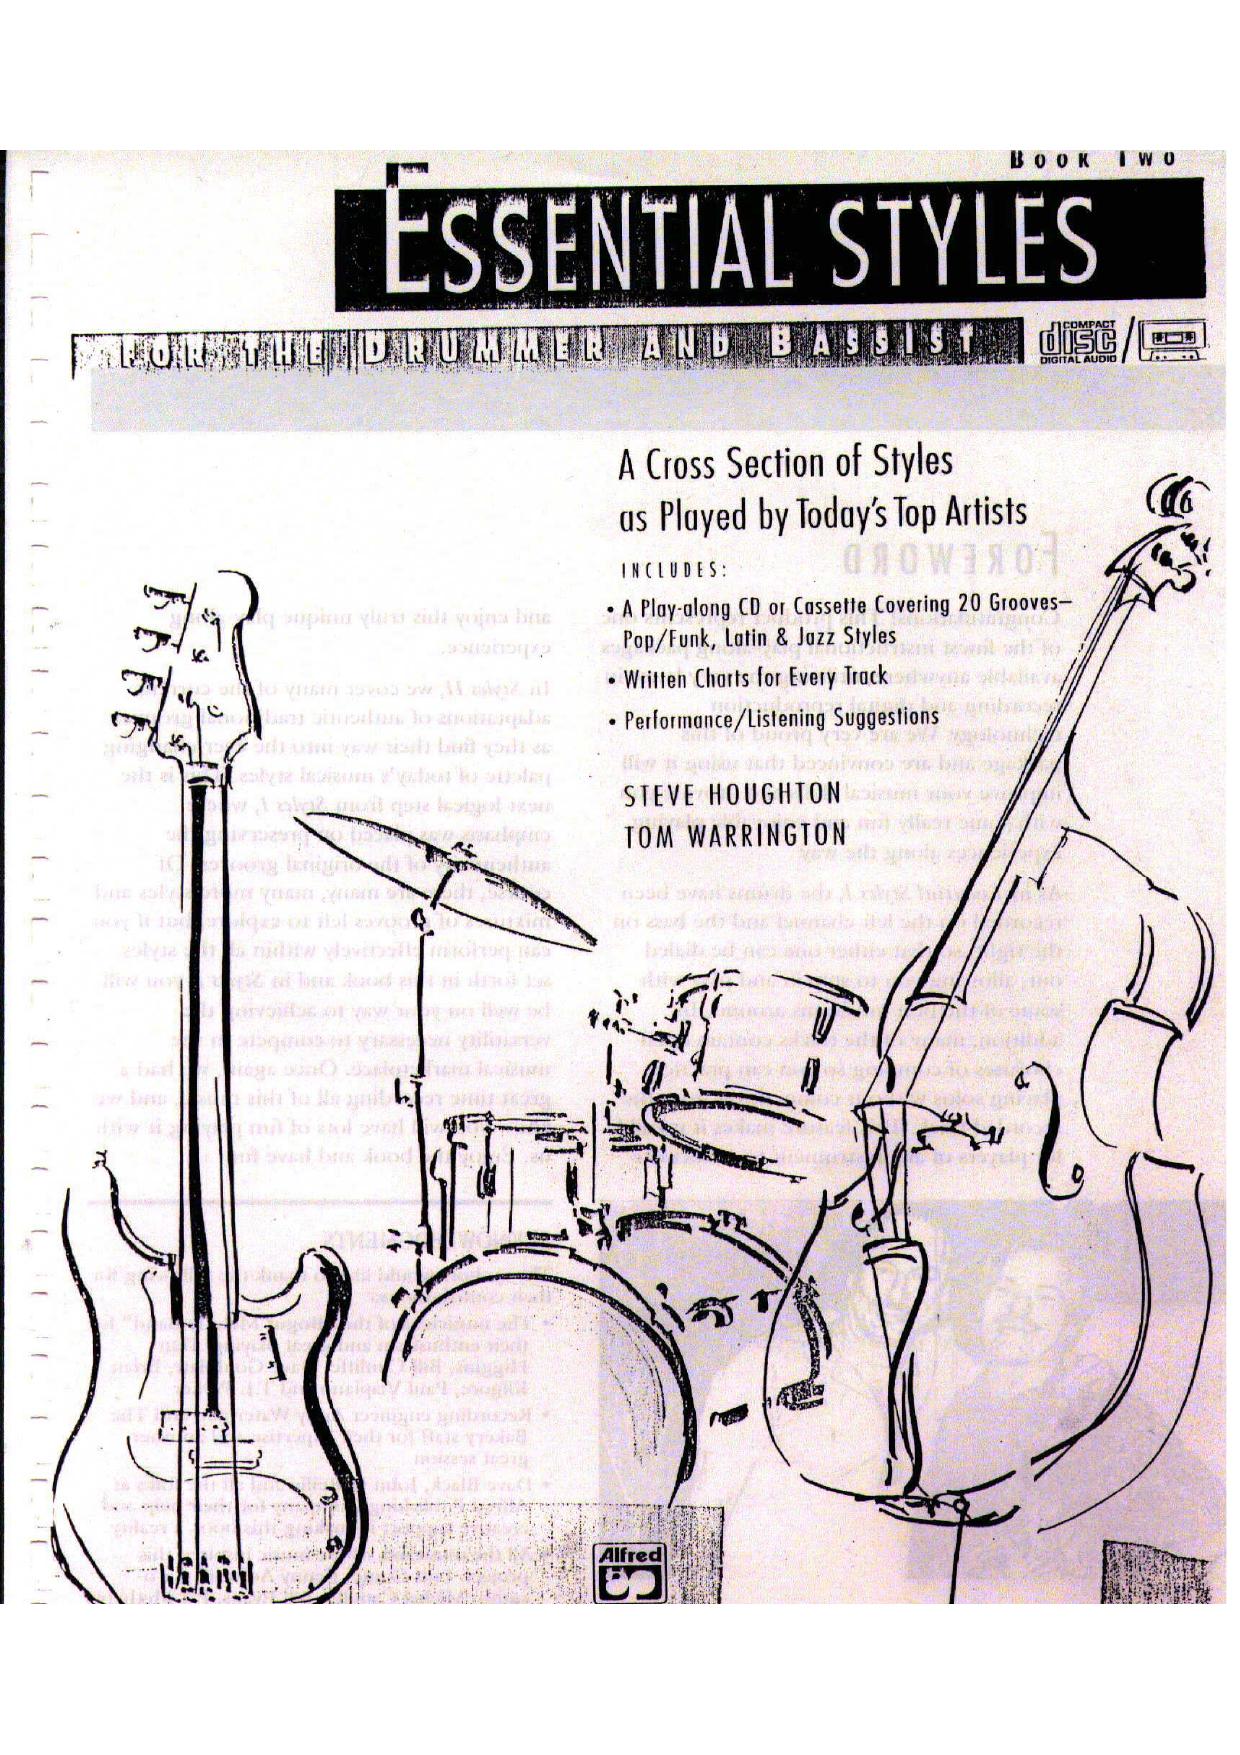 Microsoft Word - Essential styles for the drummer & bassist - Book Two - Hou.doc by Administrator